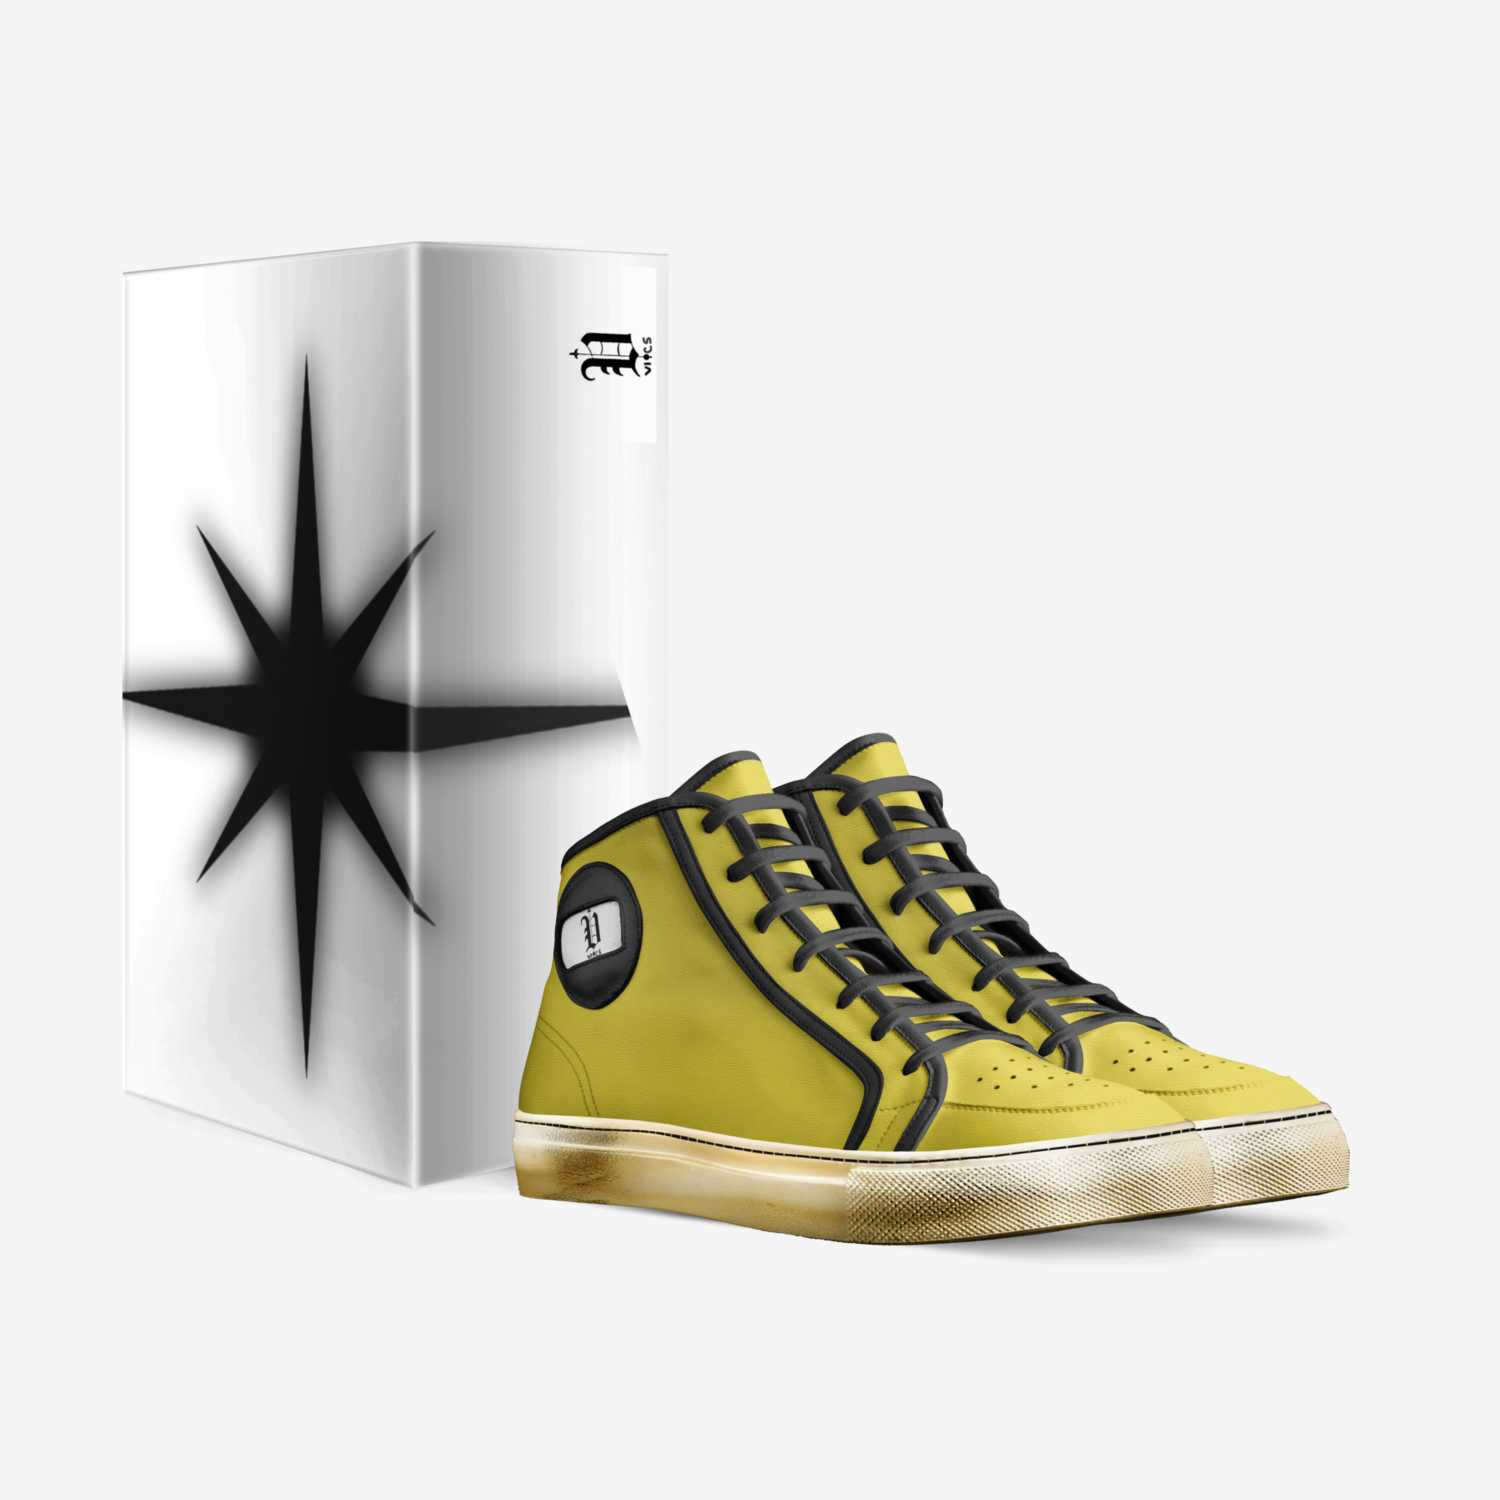 Vic's star 2 custom made in Italy shoes by Brayden Murphy | Box view